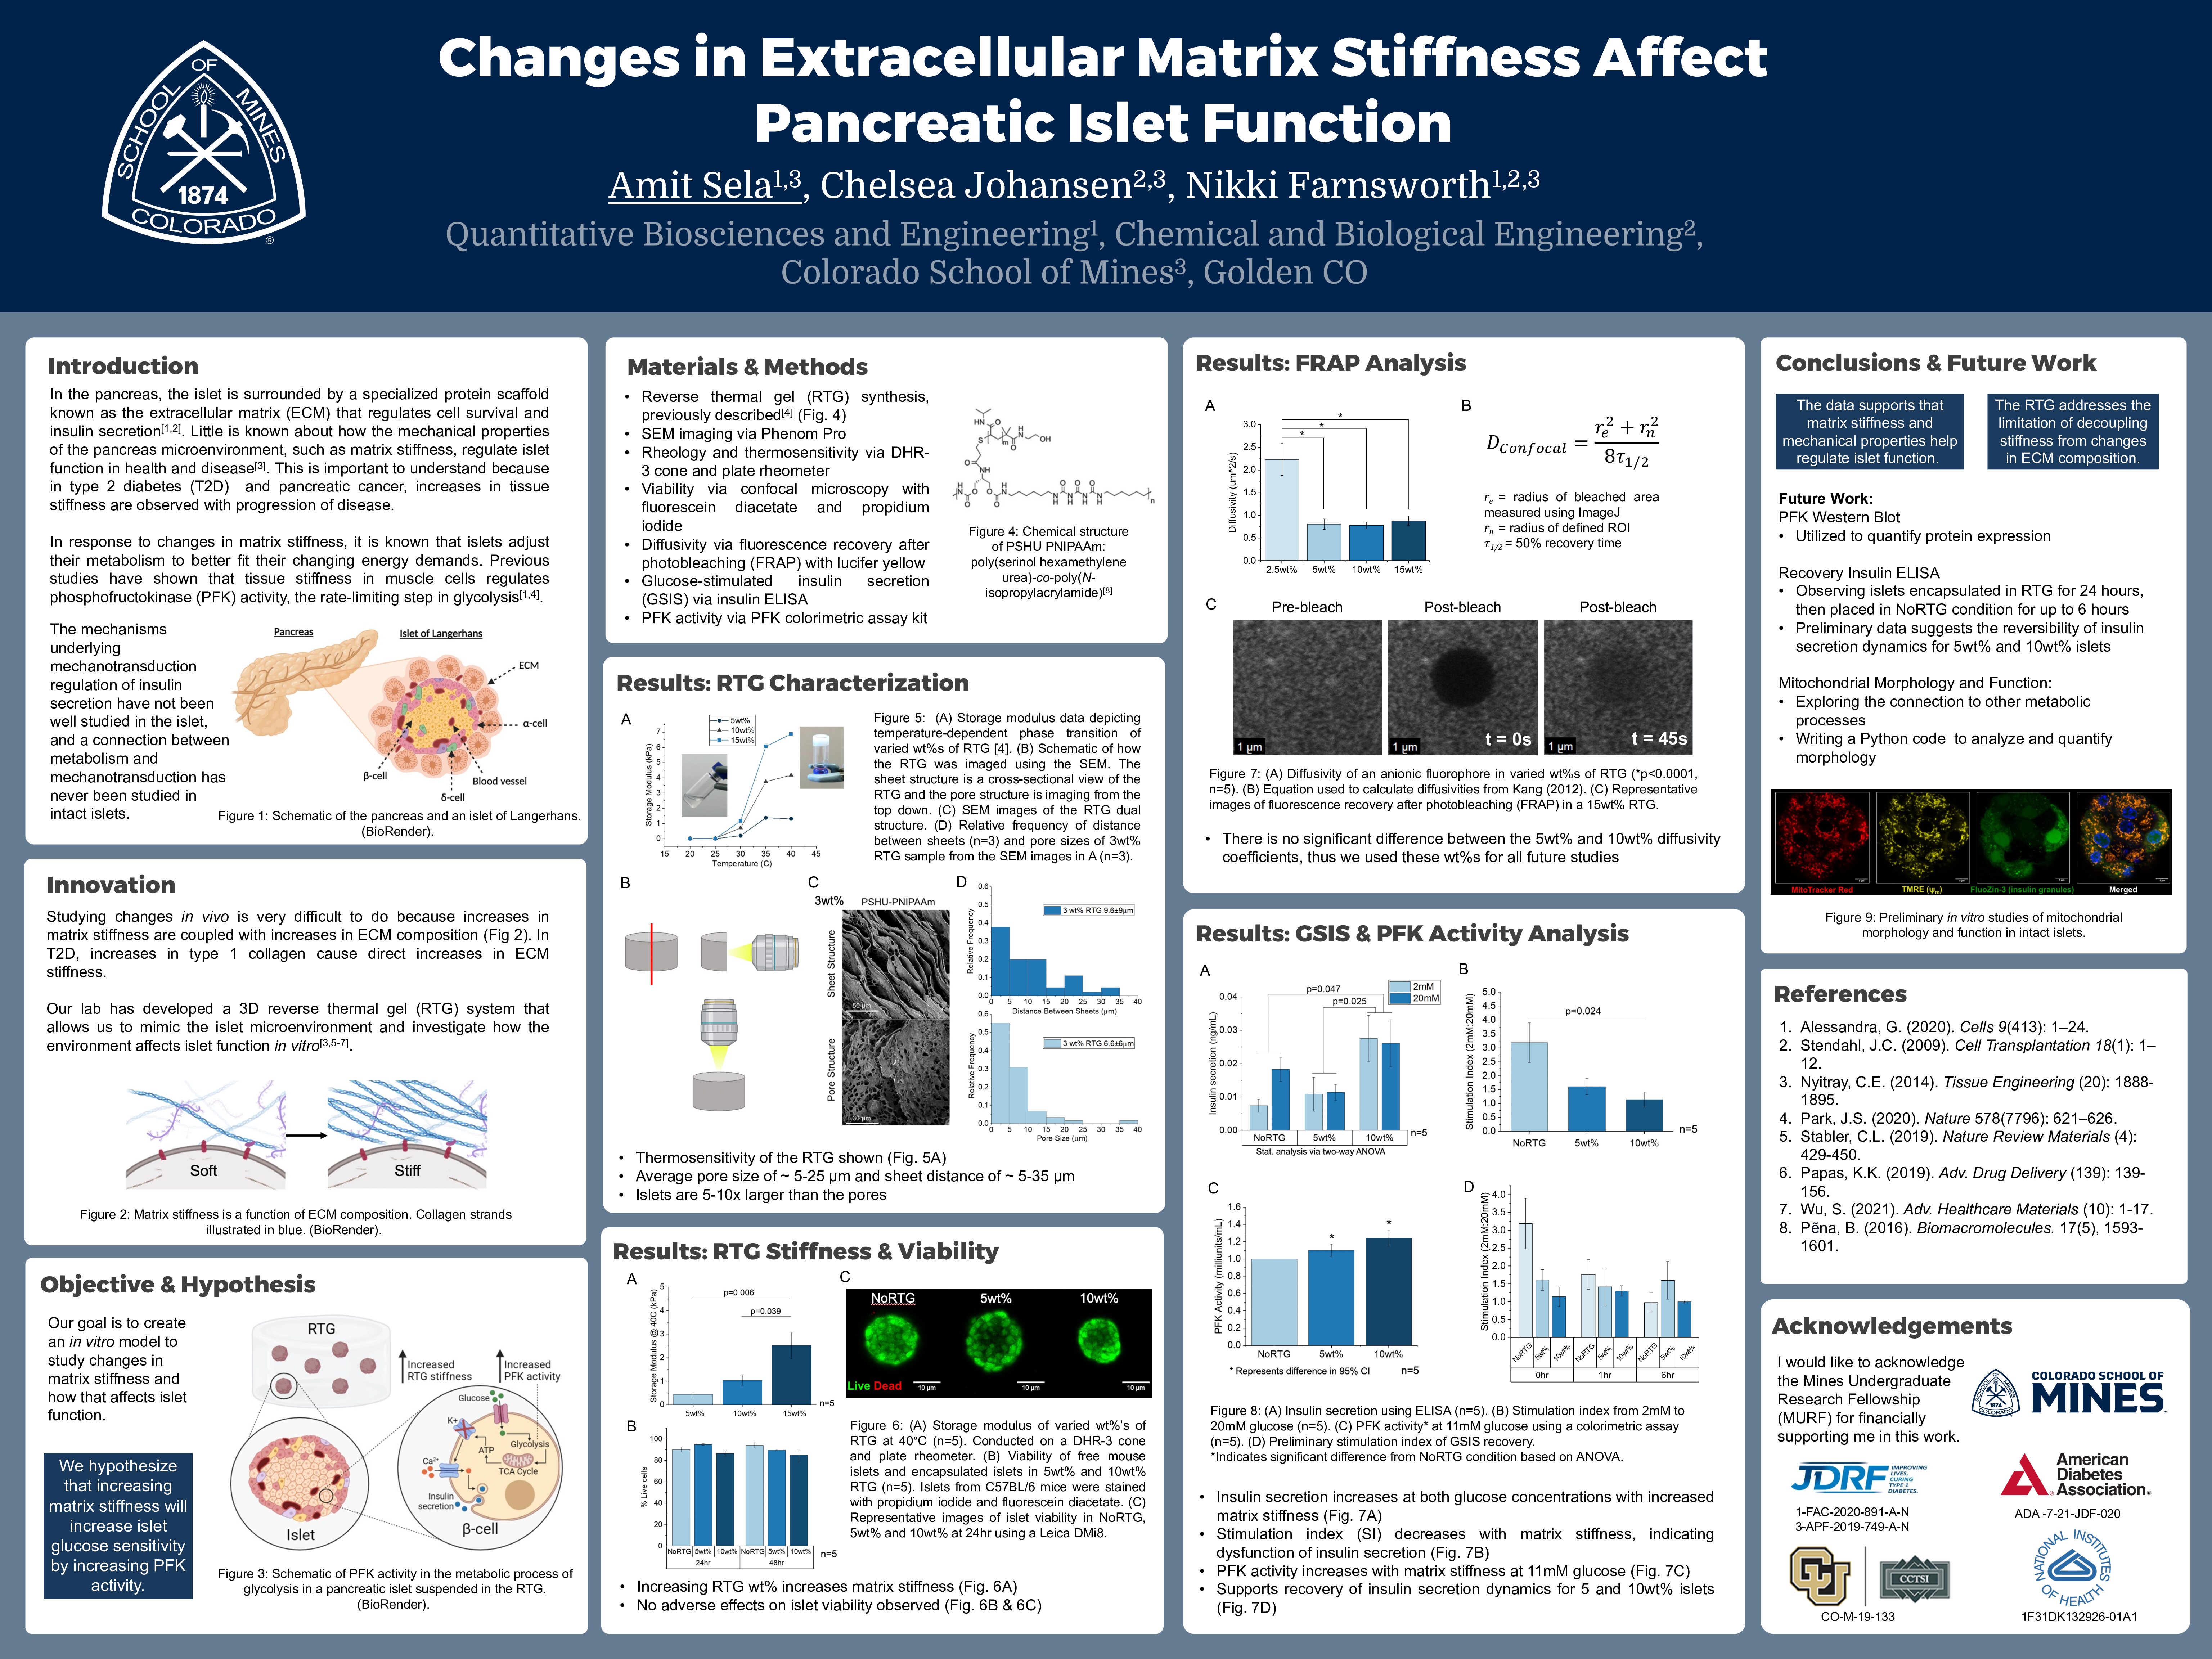 P13 Changes in Extracellular Matrix Stiffness Affect Pancreatic Islet Function